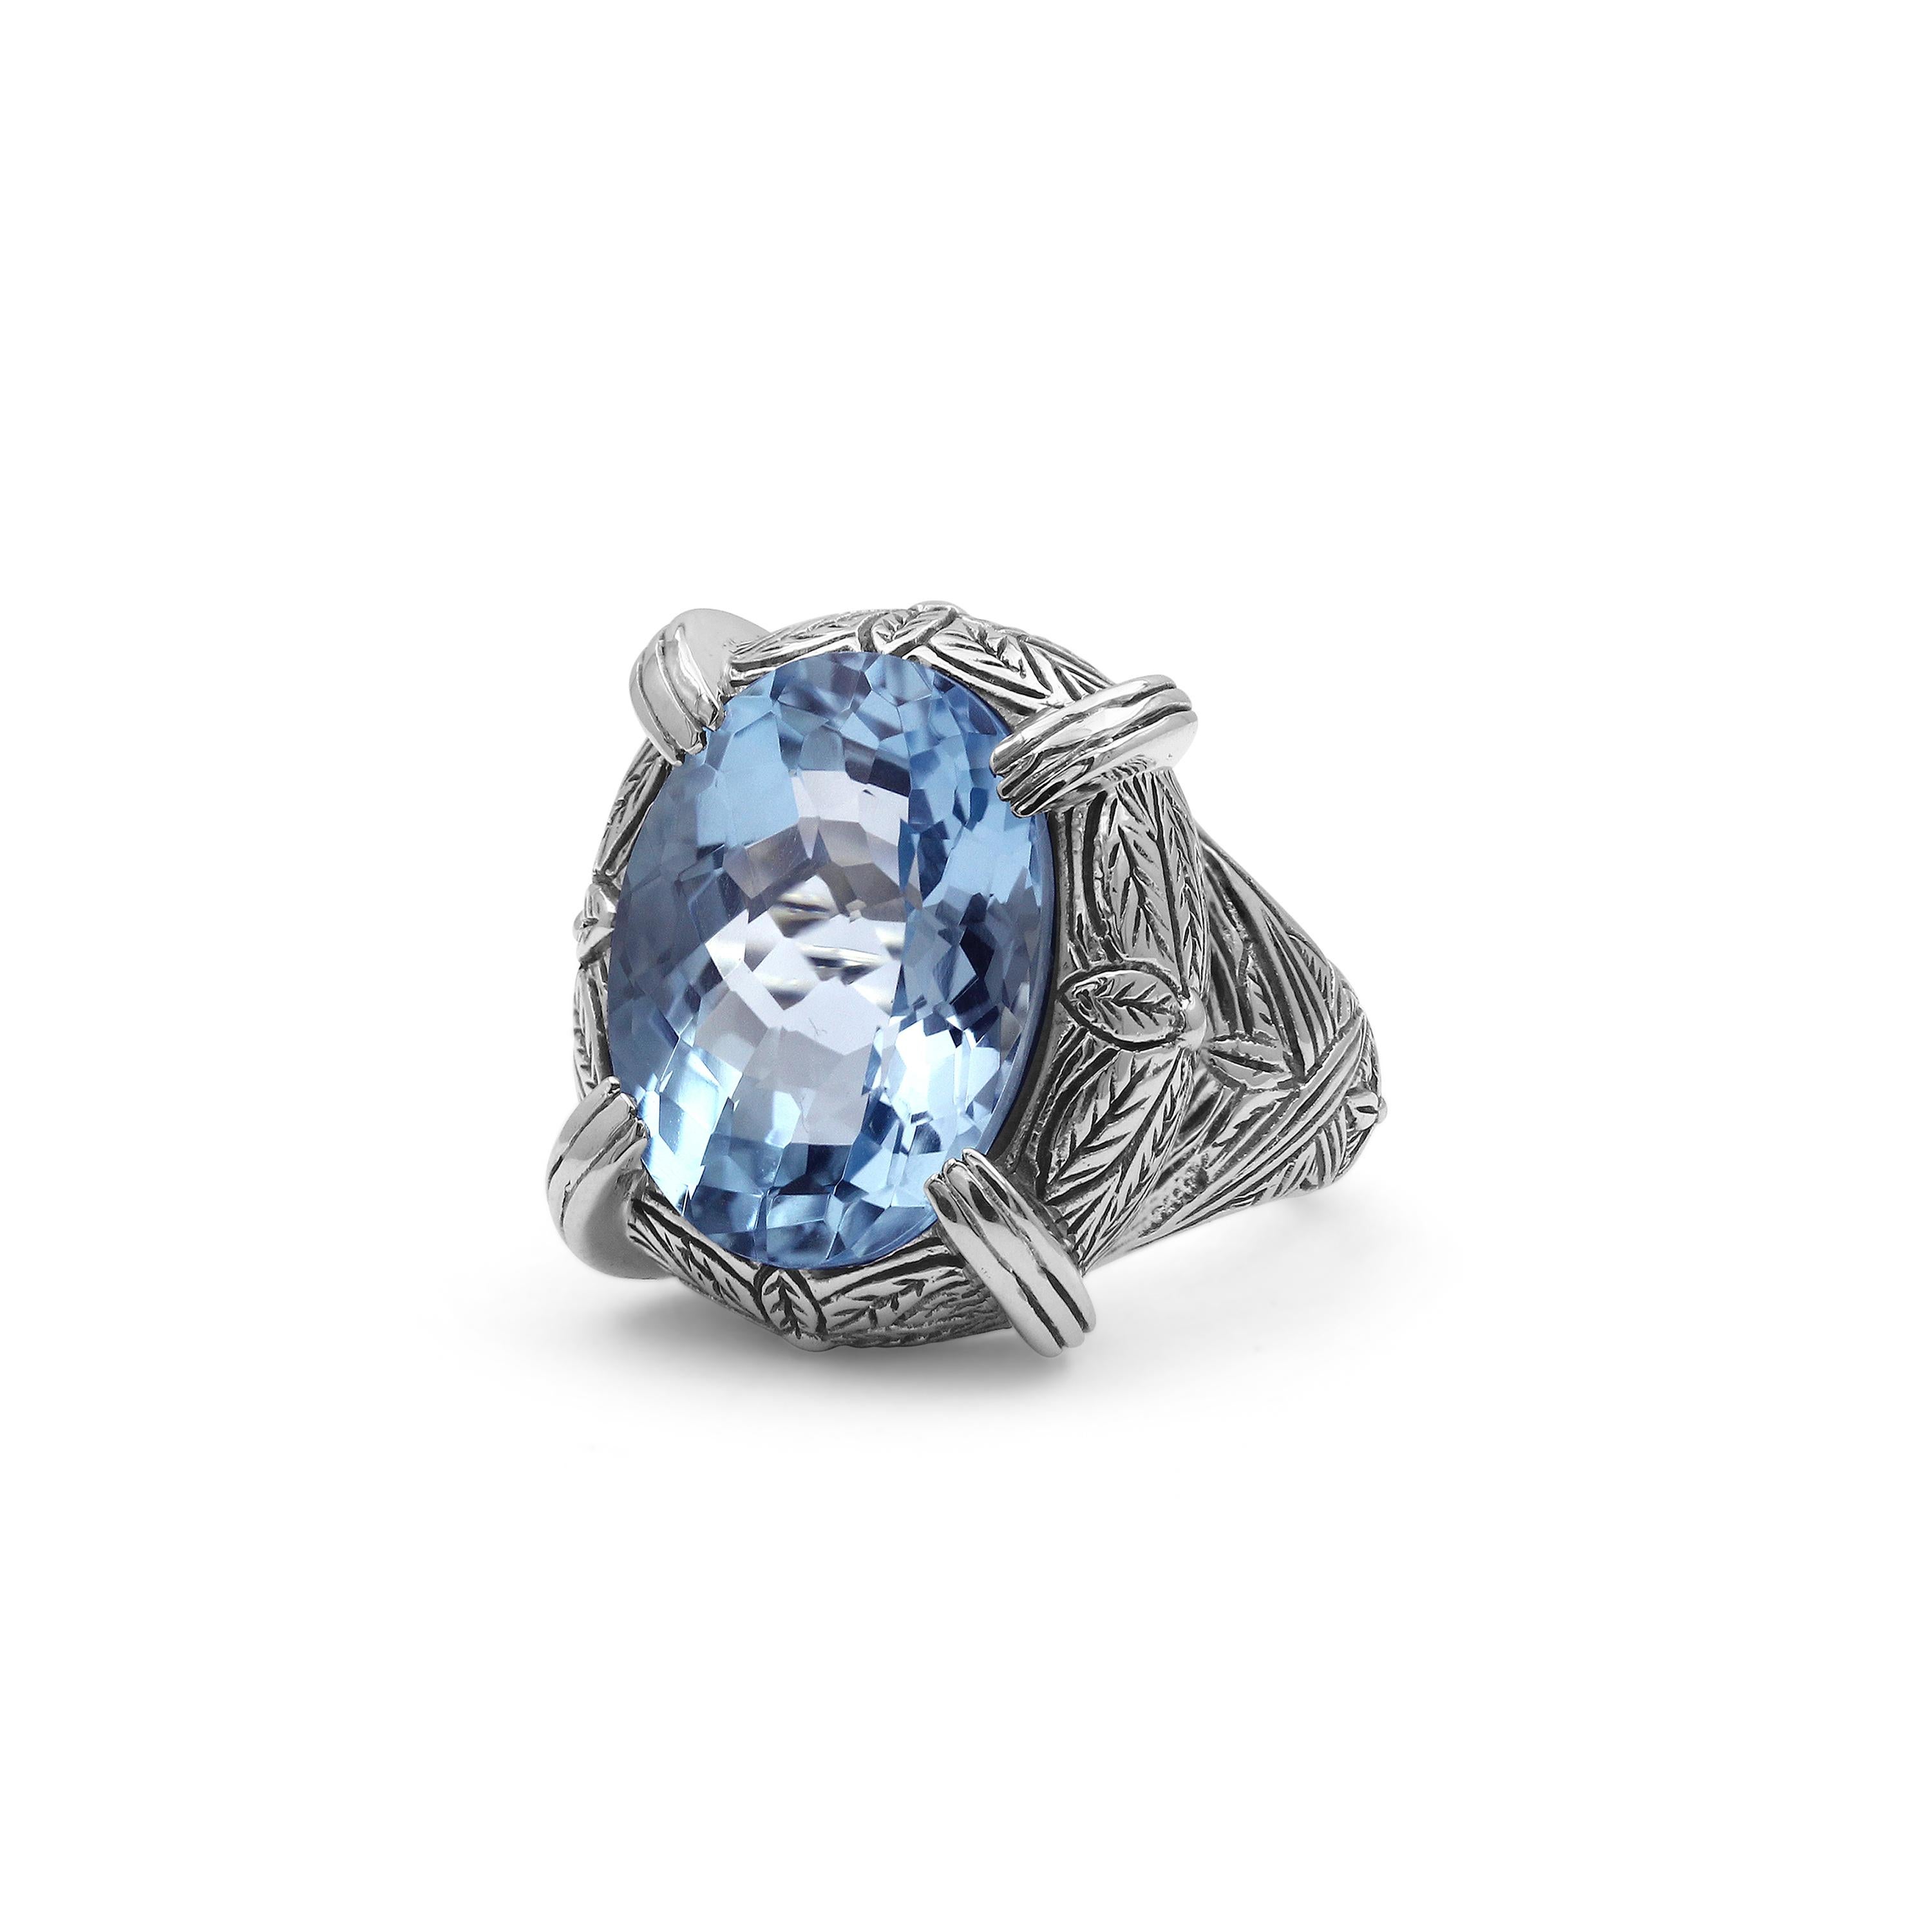 Behold the breathtaking beauty of this exquisite Faceted Blue Topaz Ring from the revered Stephen Dweck brand. Imbued with the finest quality stones, this ring is a celebration of elegance and style. The captivating blue topaz is masterfully cut to